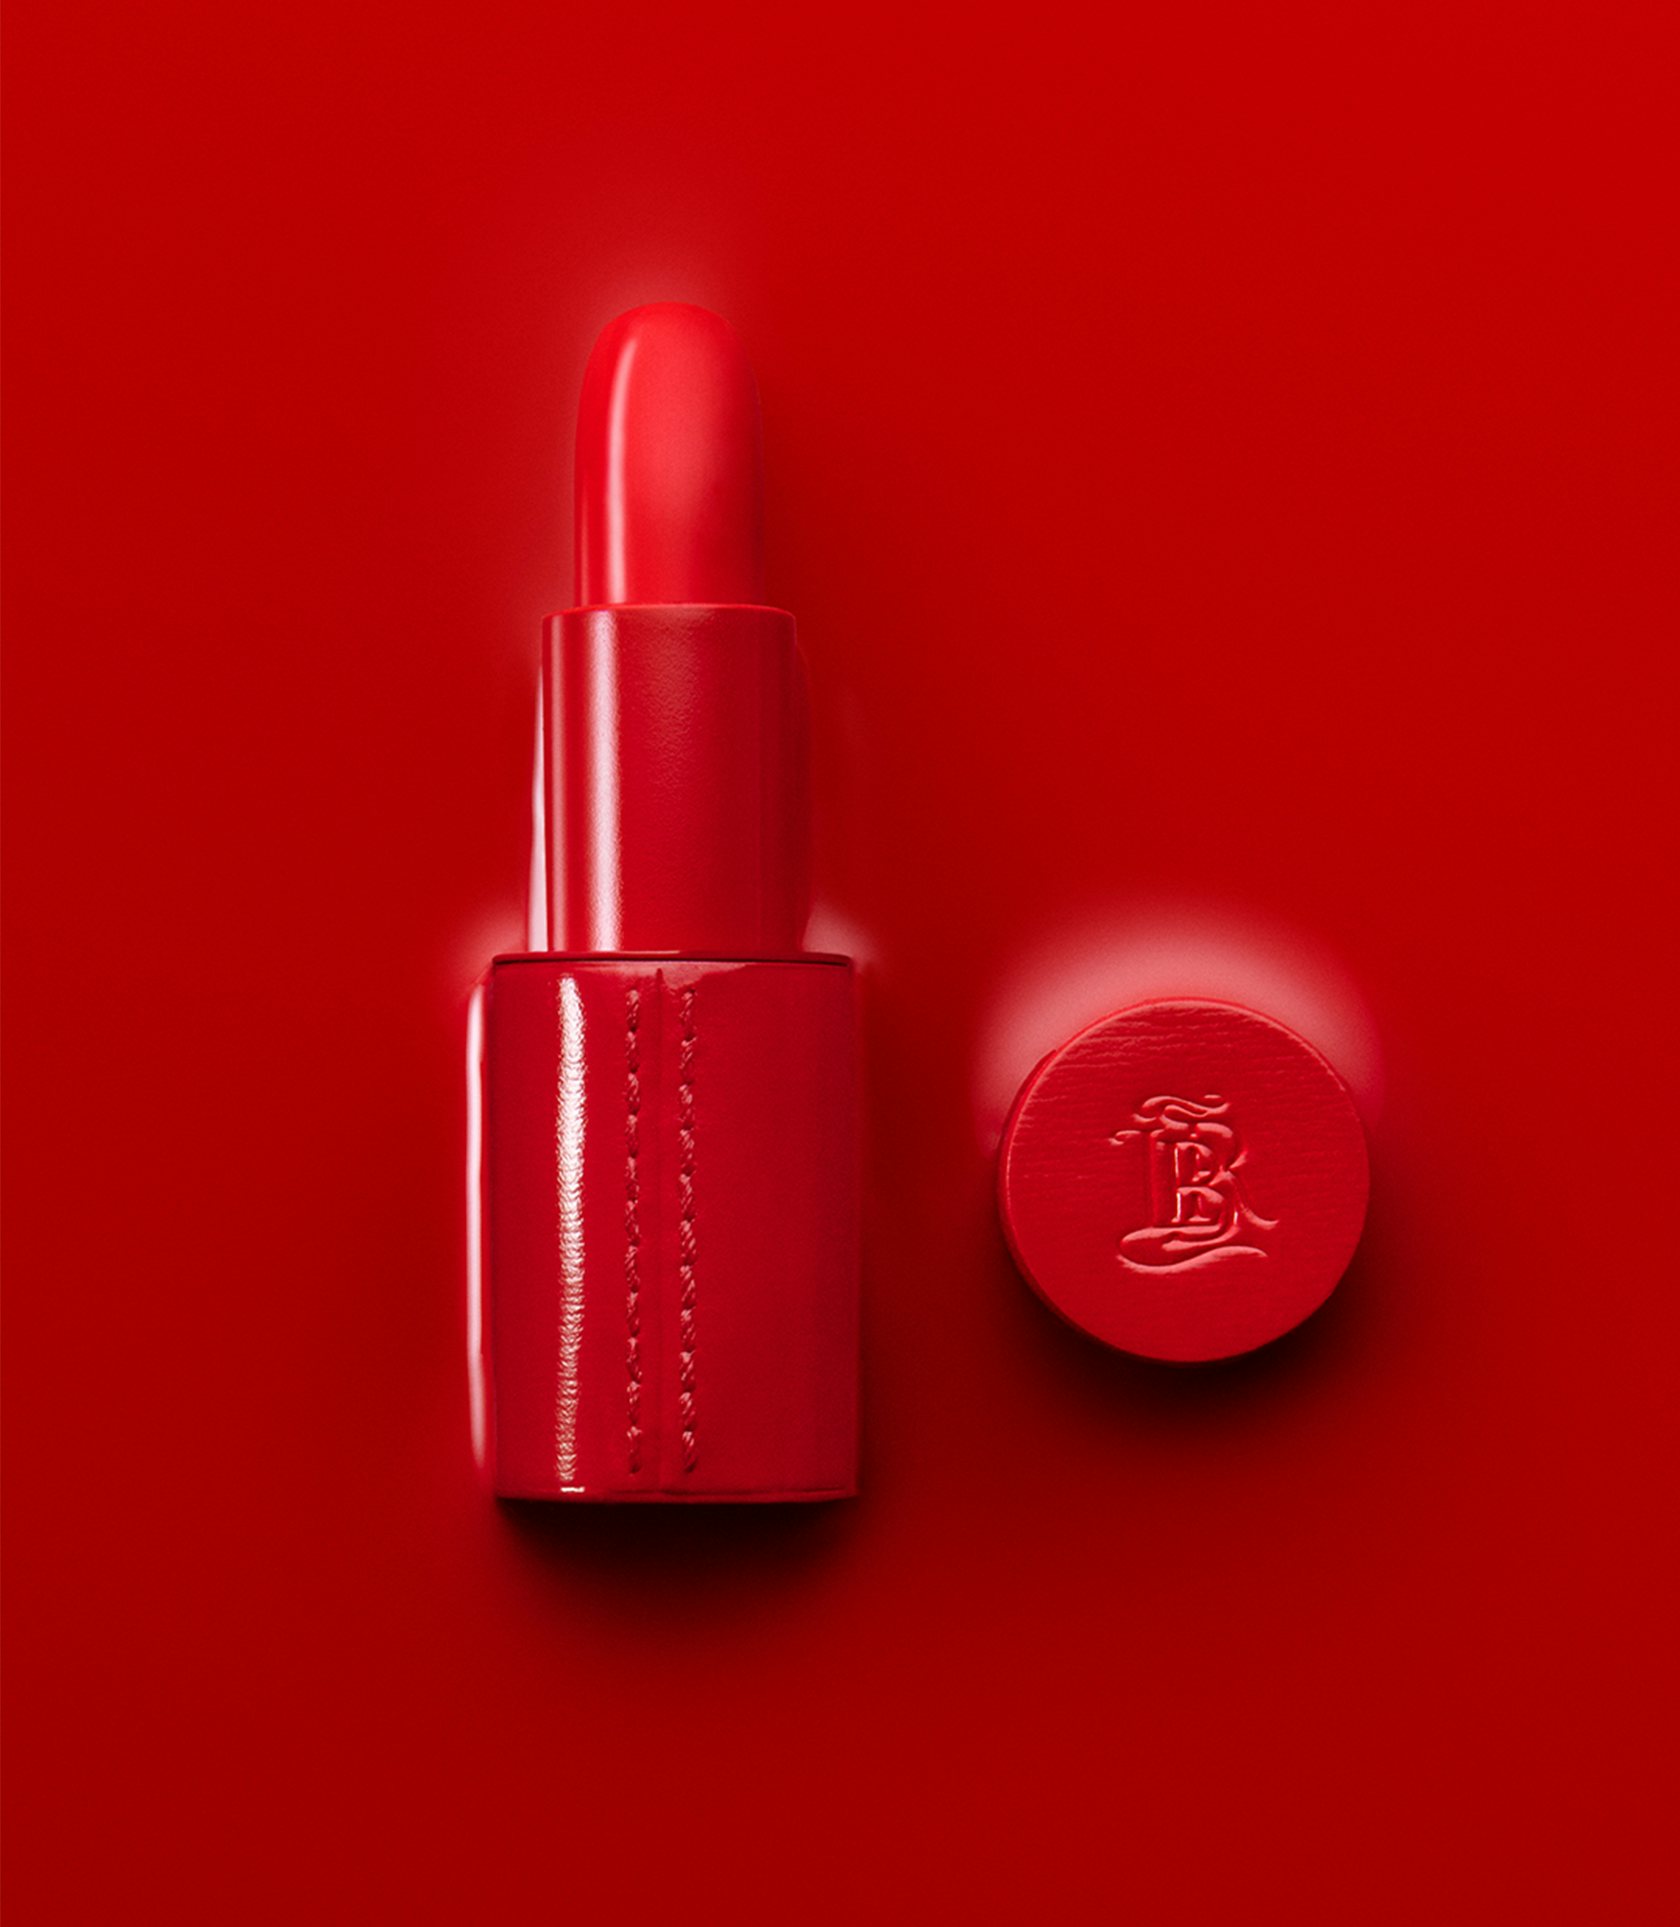 La bouche rouge red serum in red fine leather lipstick case on a red background